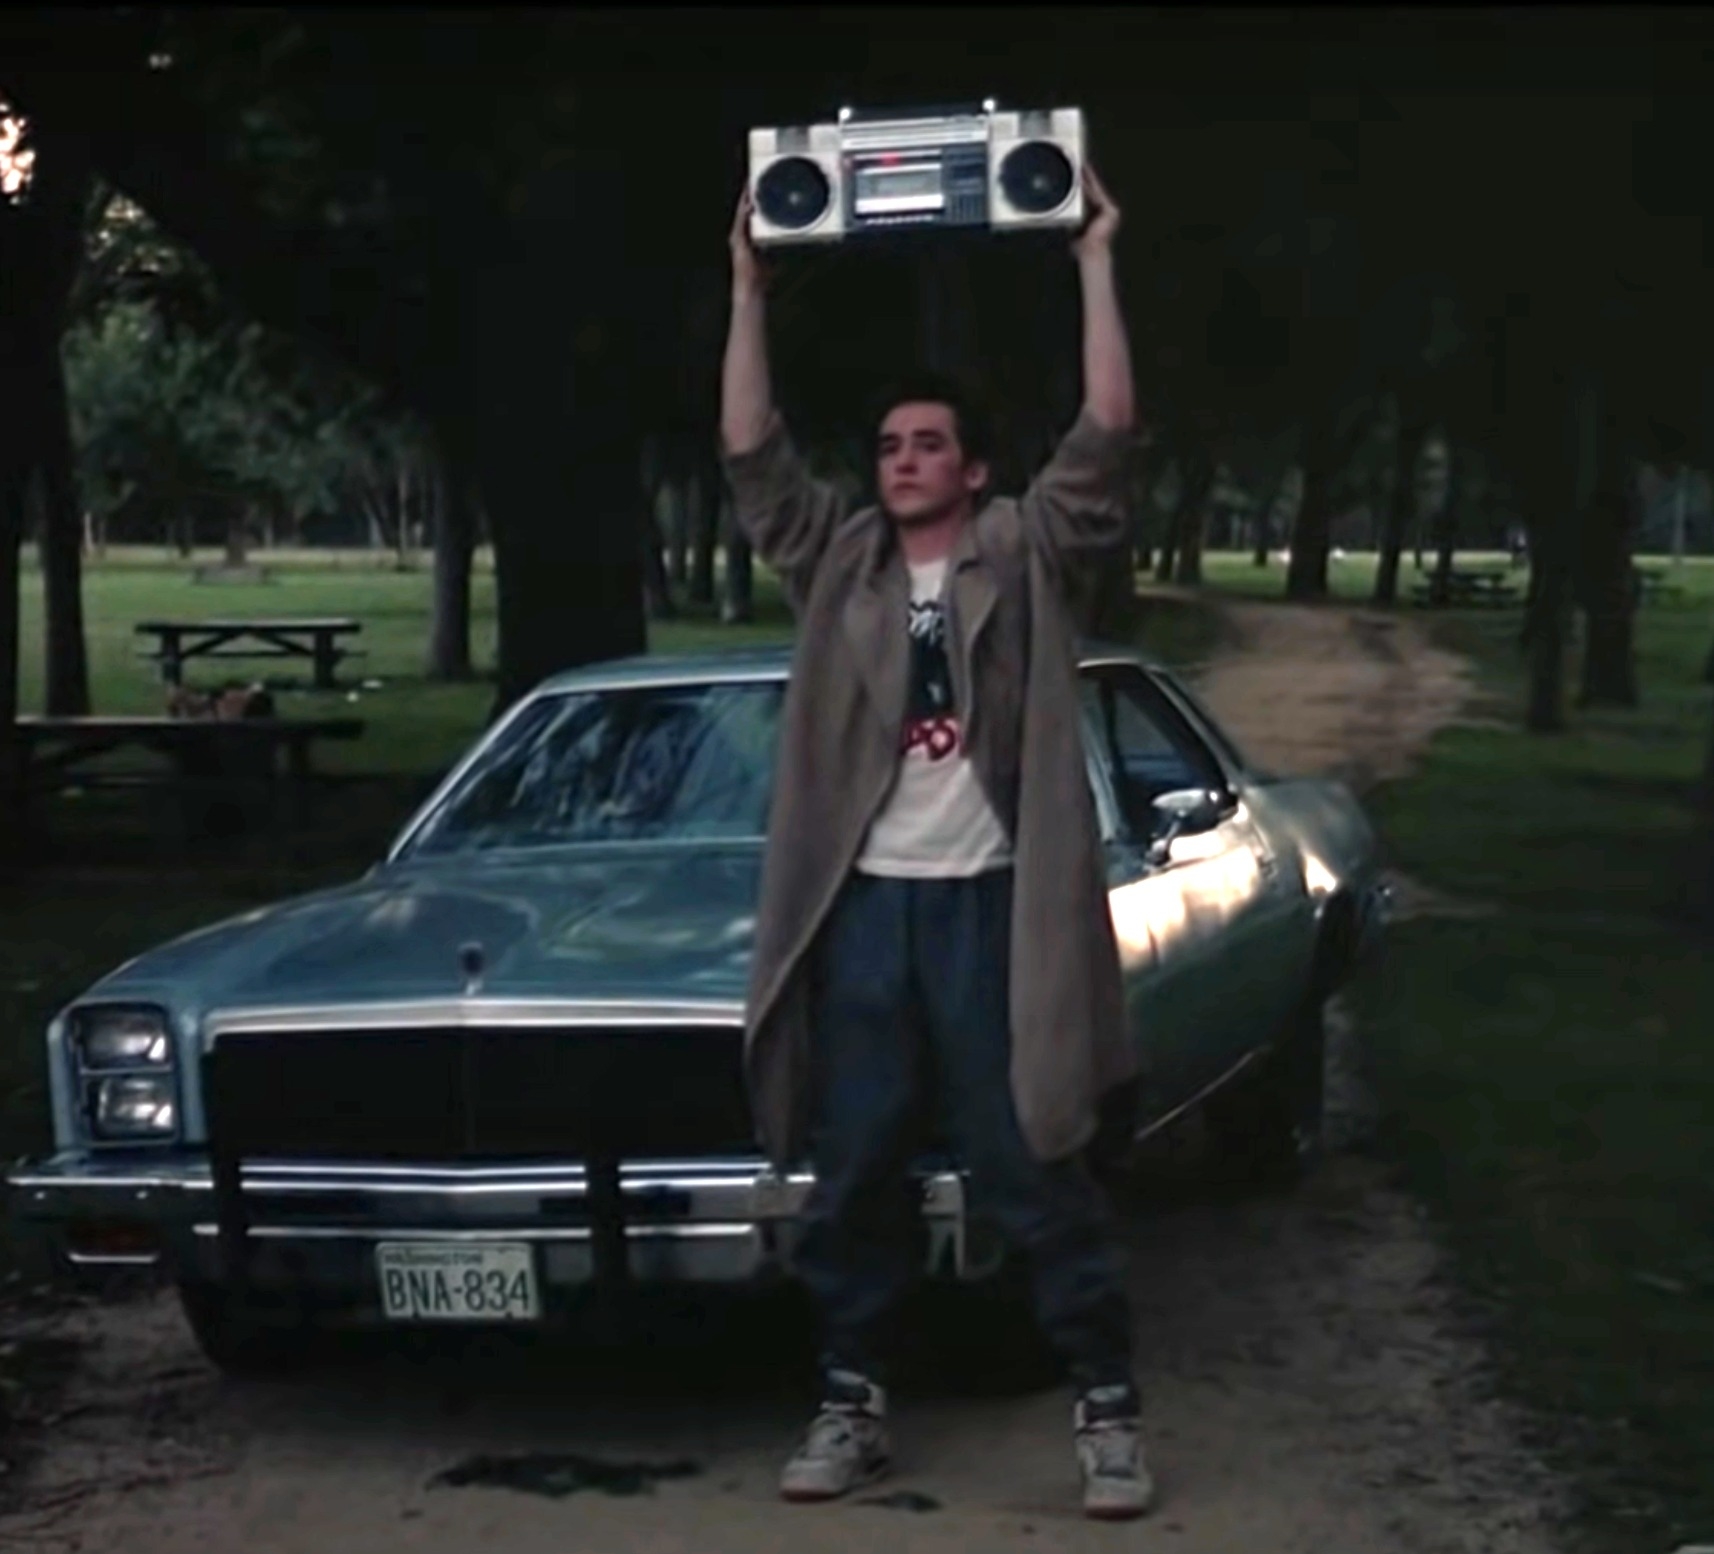 John in Say Anything holding up a boom box